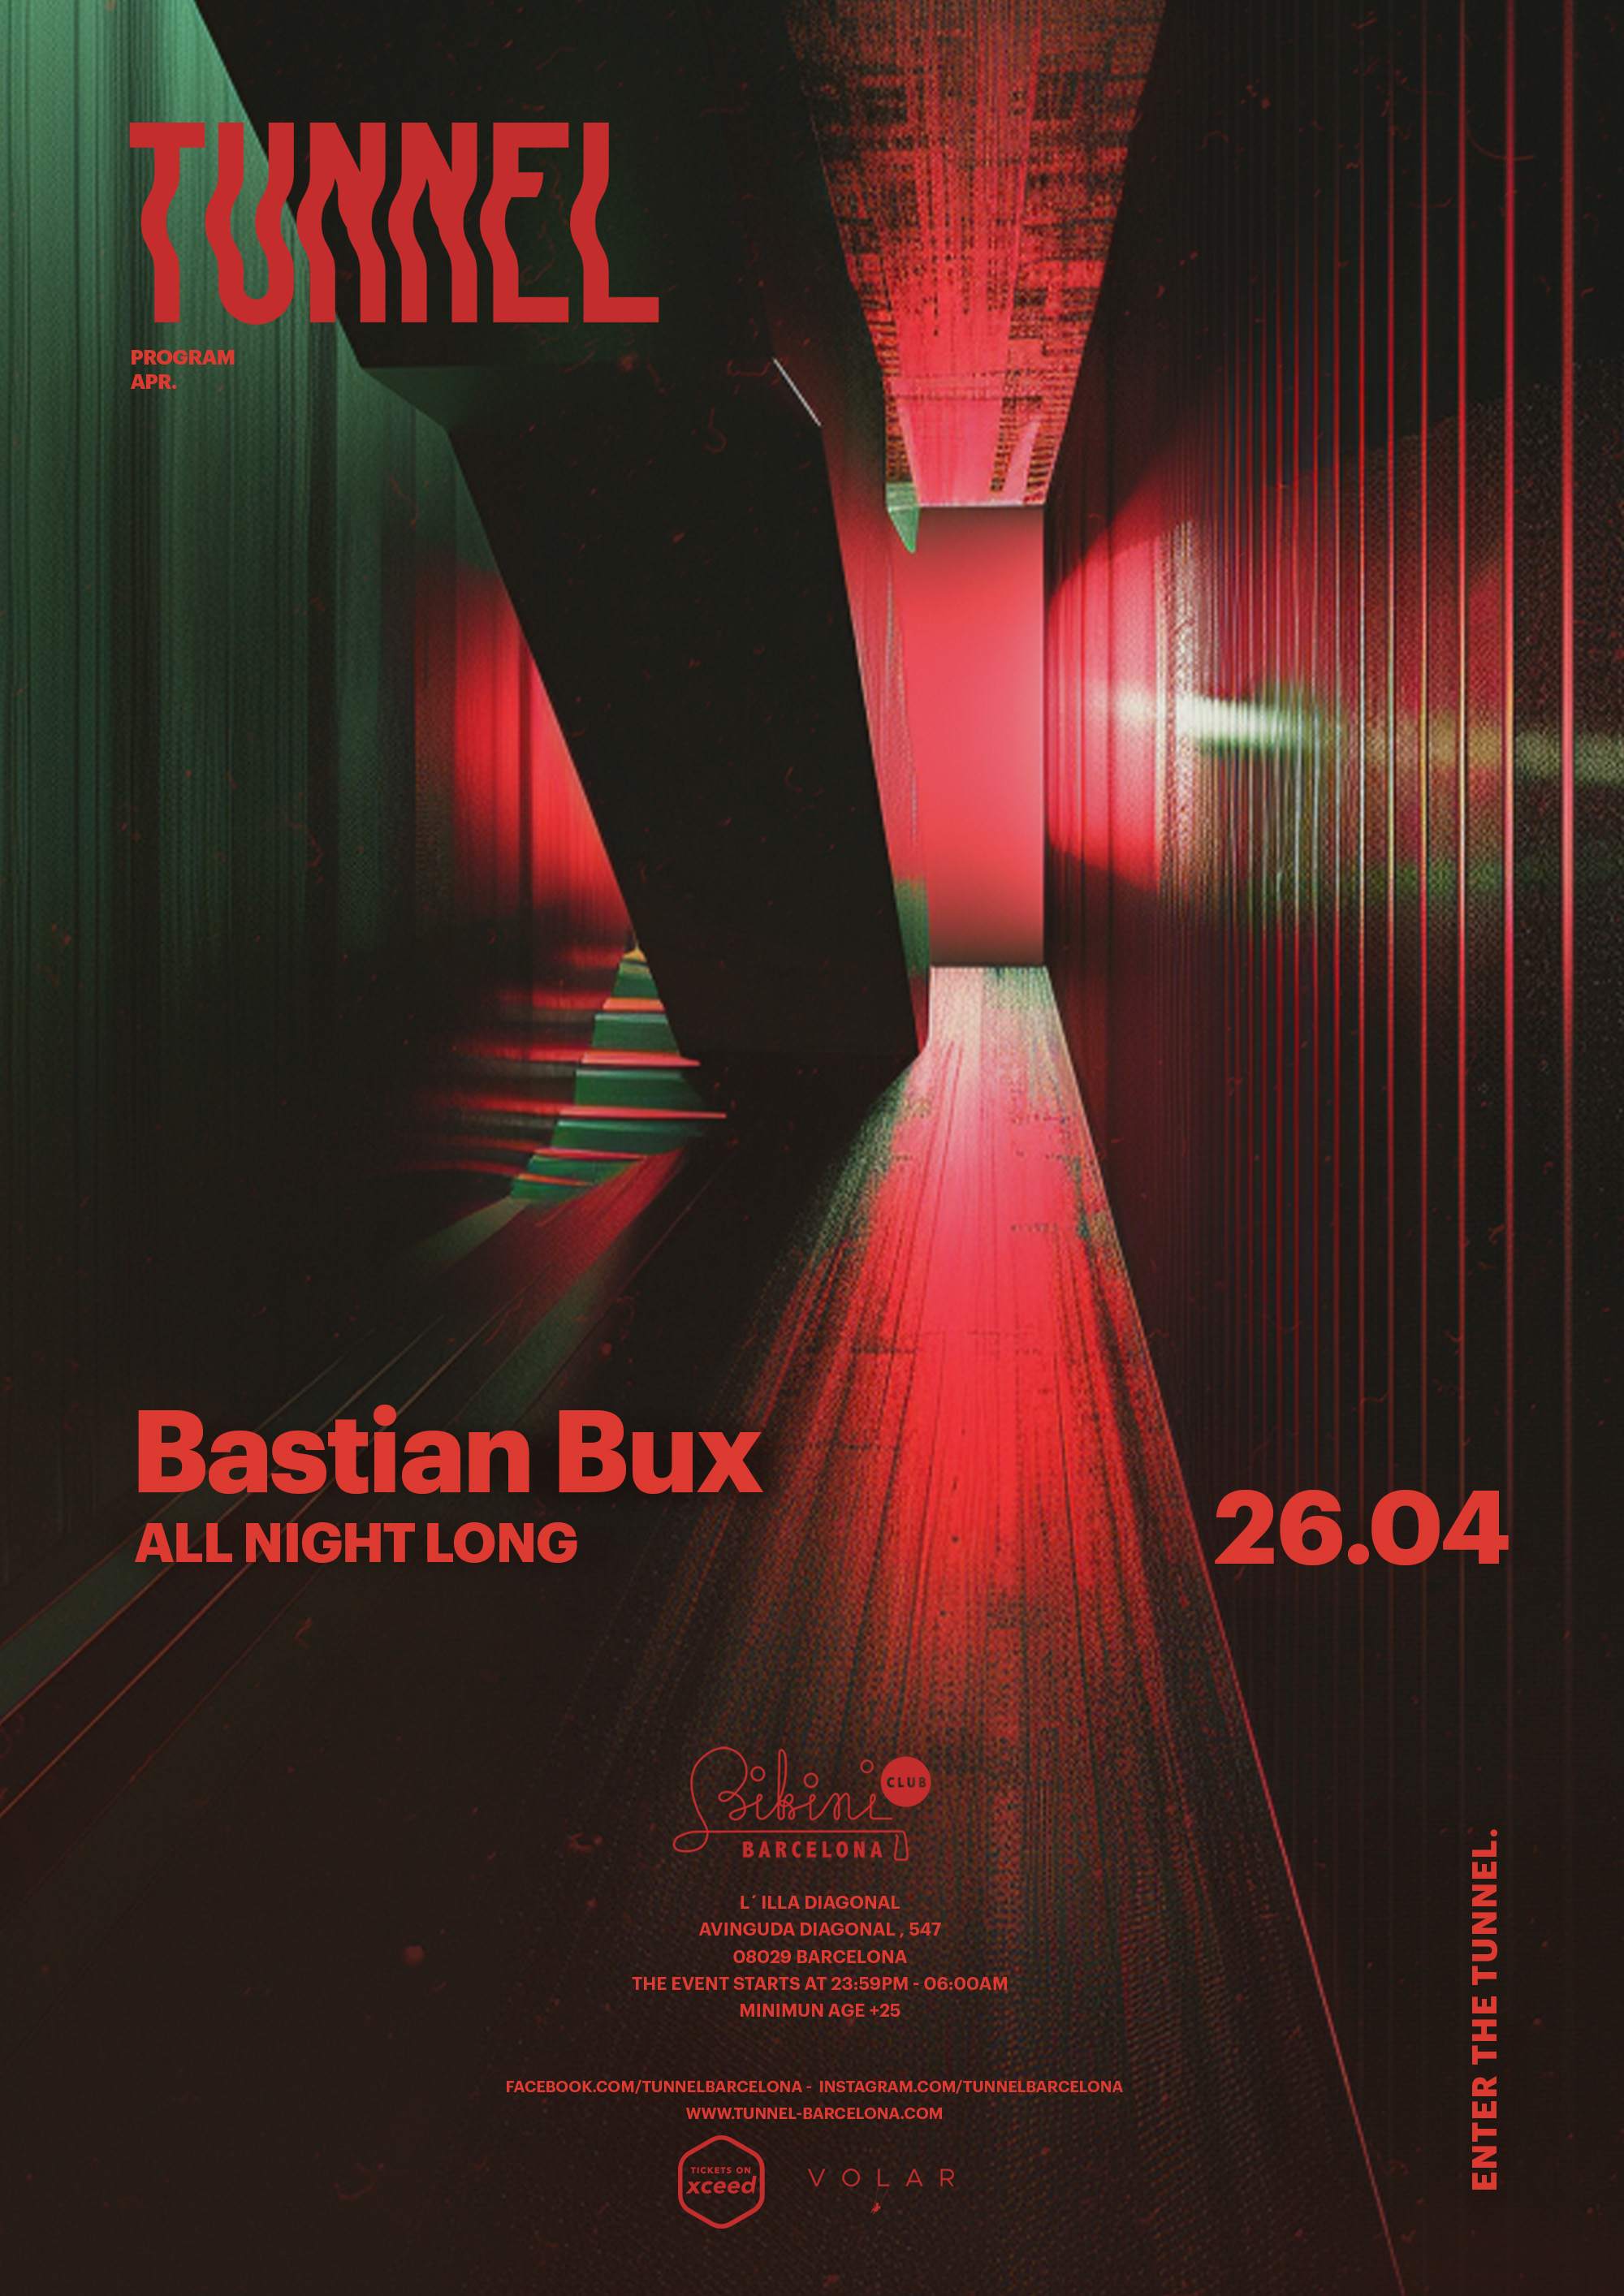 Tunnel pres. Bastian Bux (All Night Long) - フライヤー表